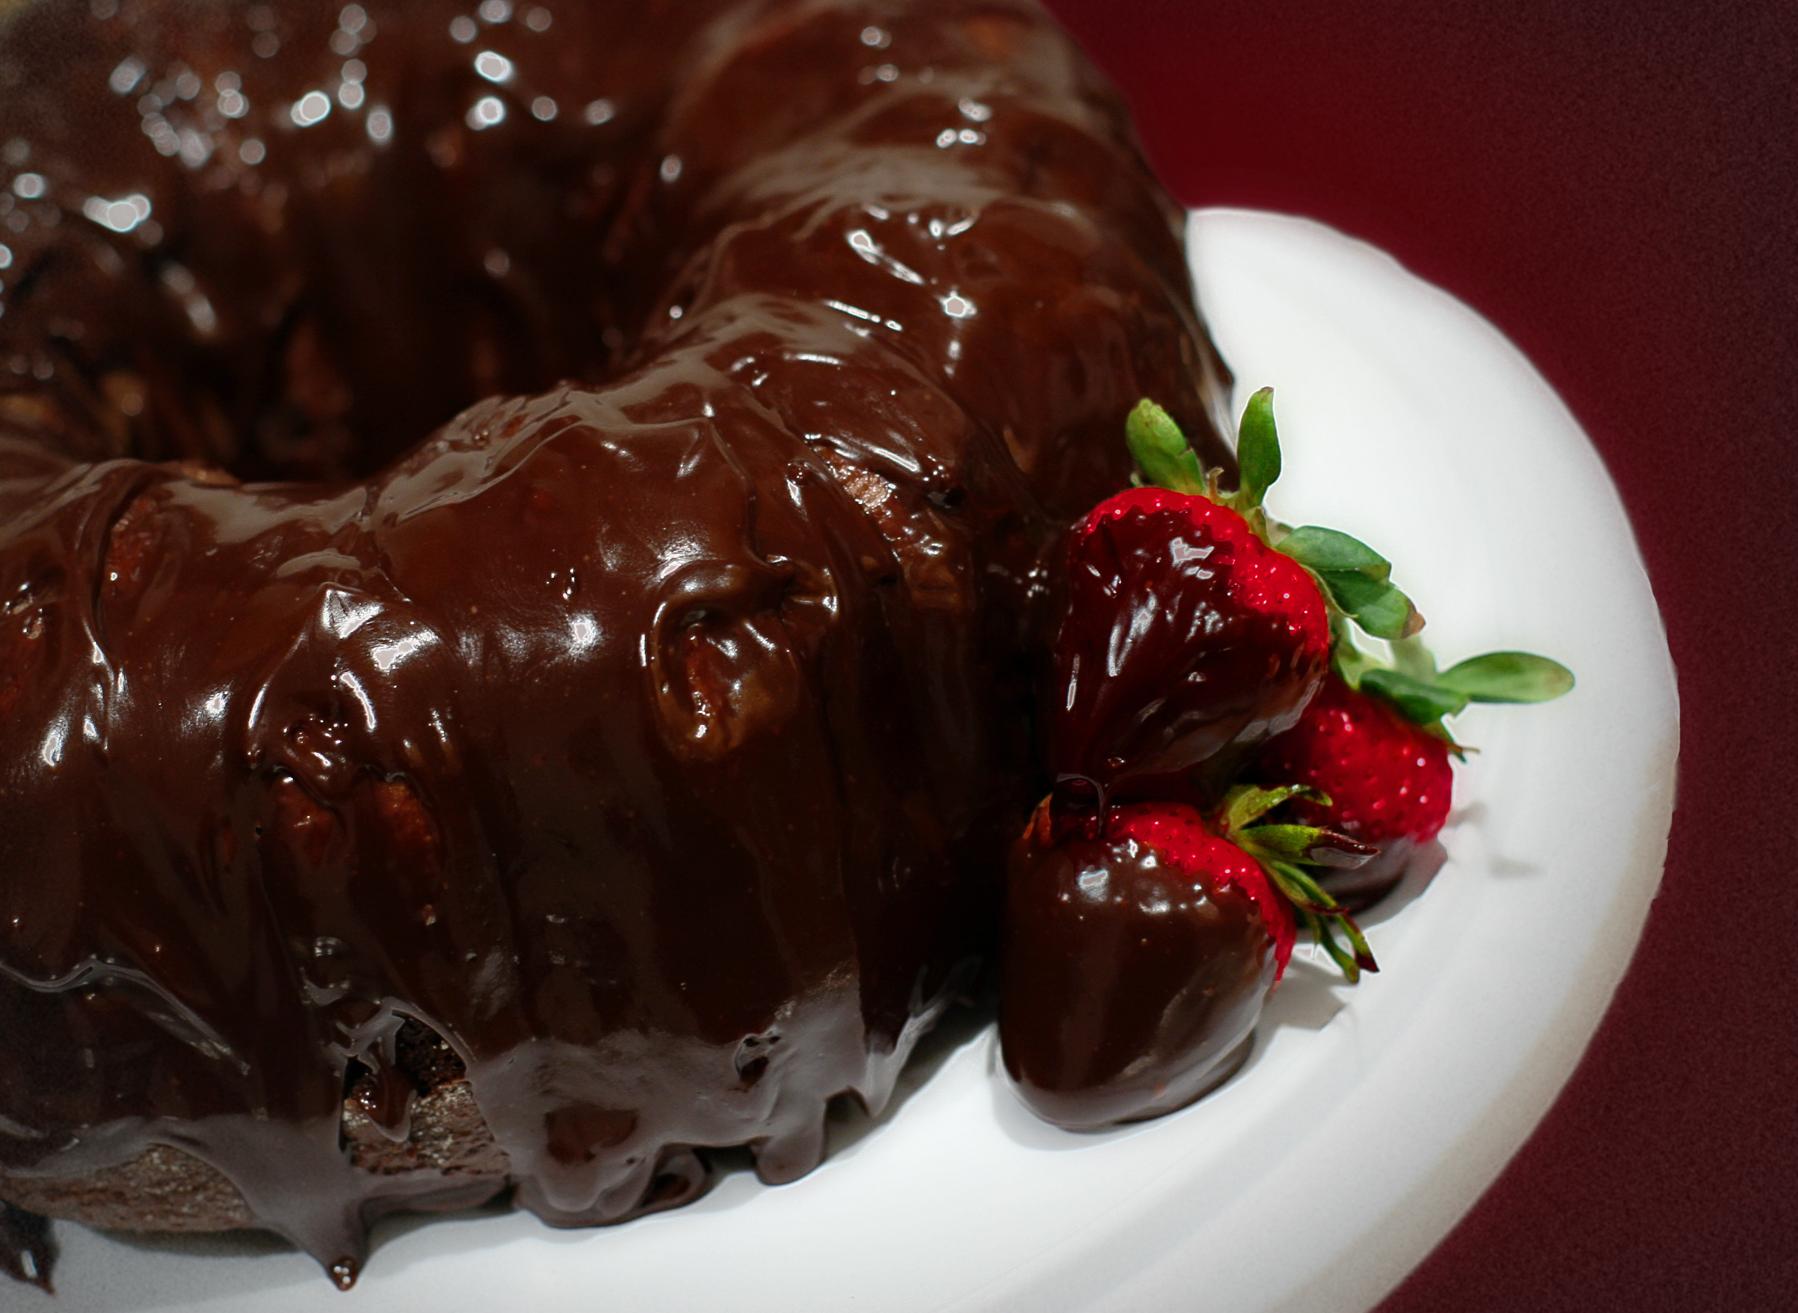  Get ready to indulge in a wine-infused chocolate delight!